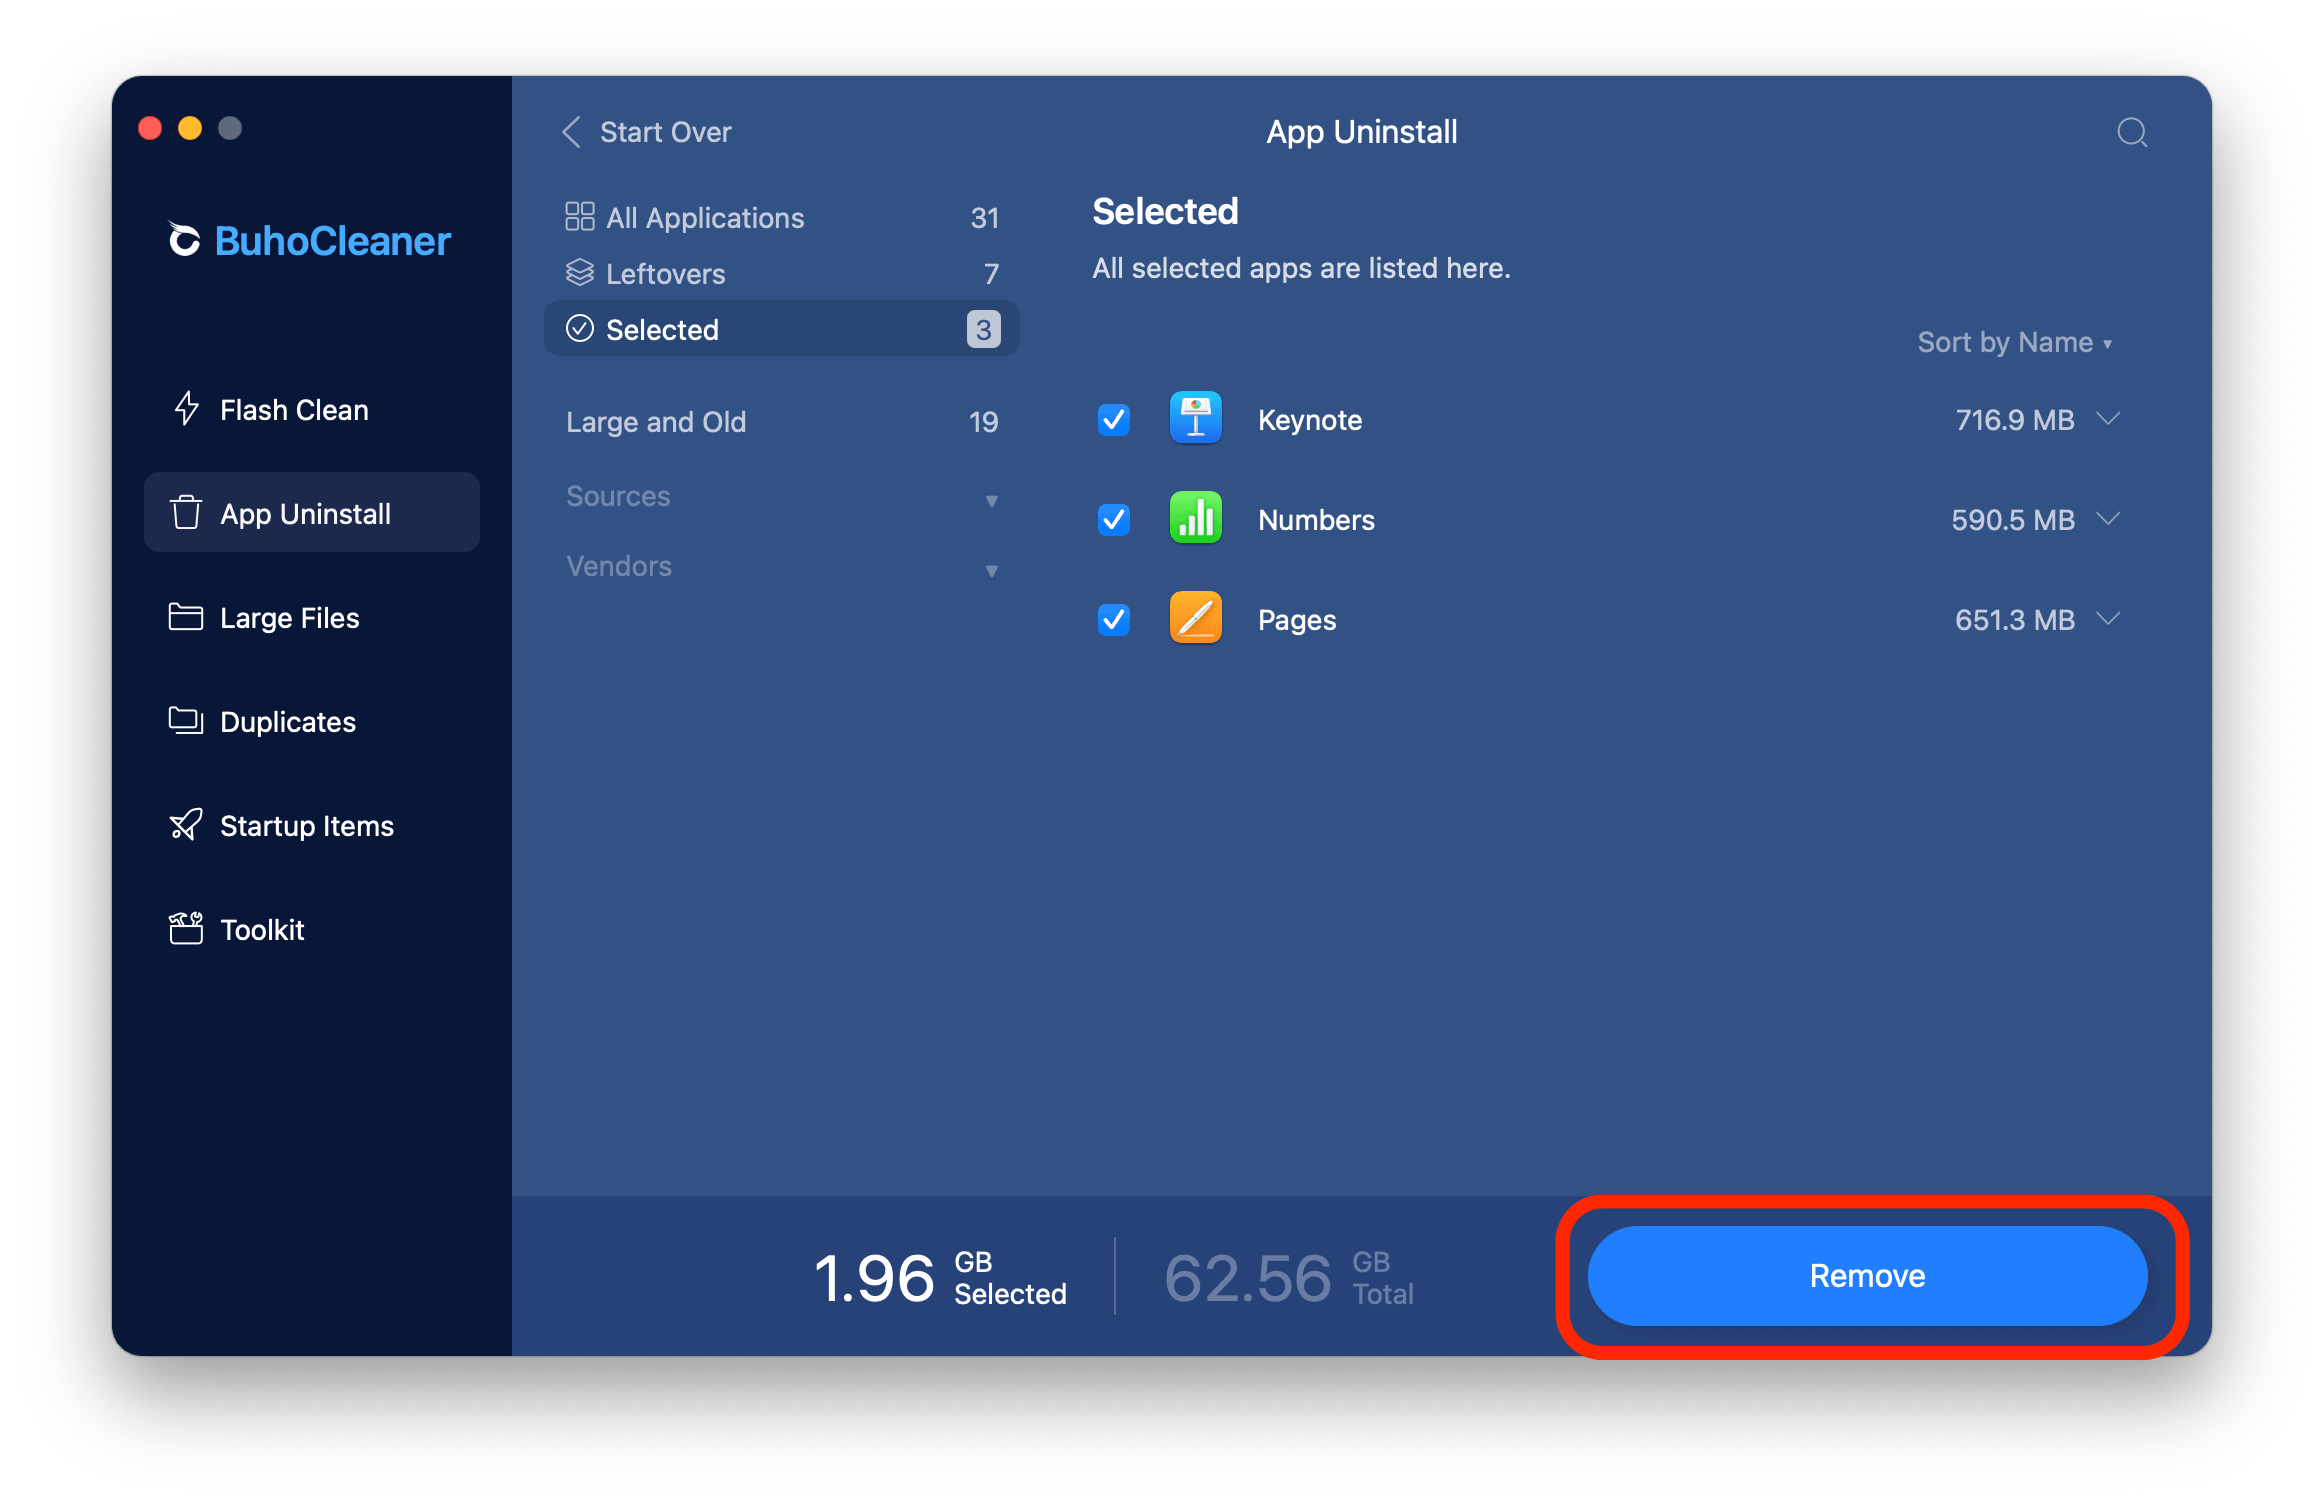 Start To Remove Apps